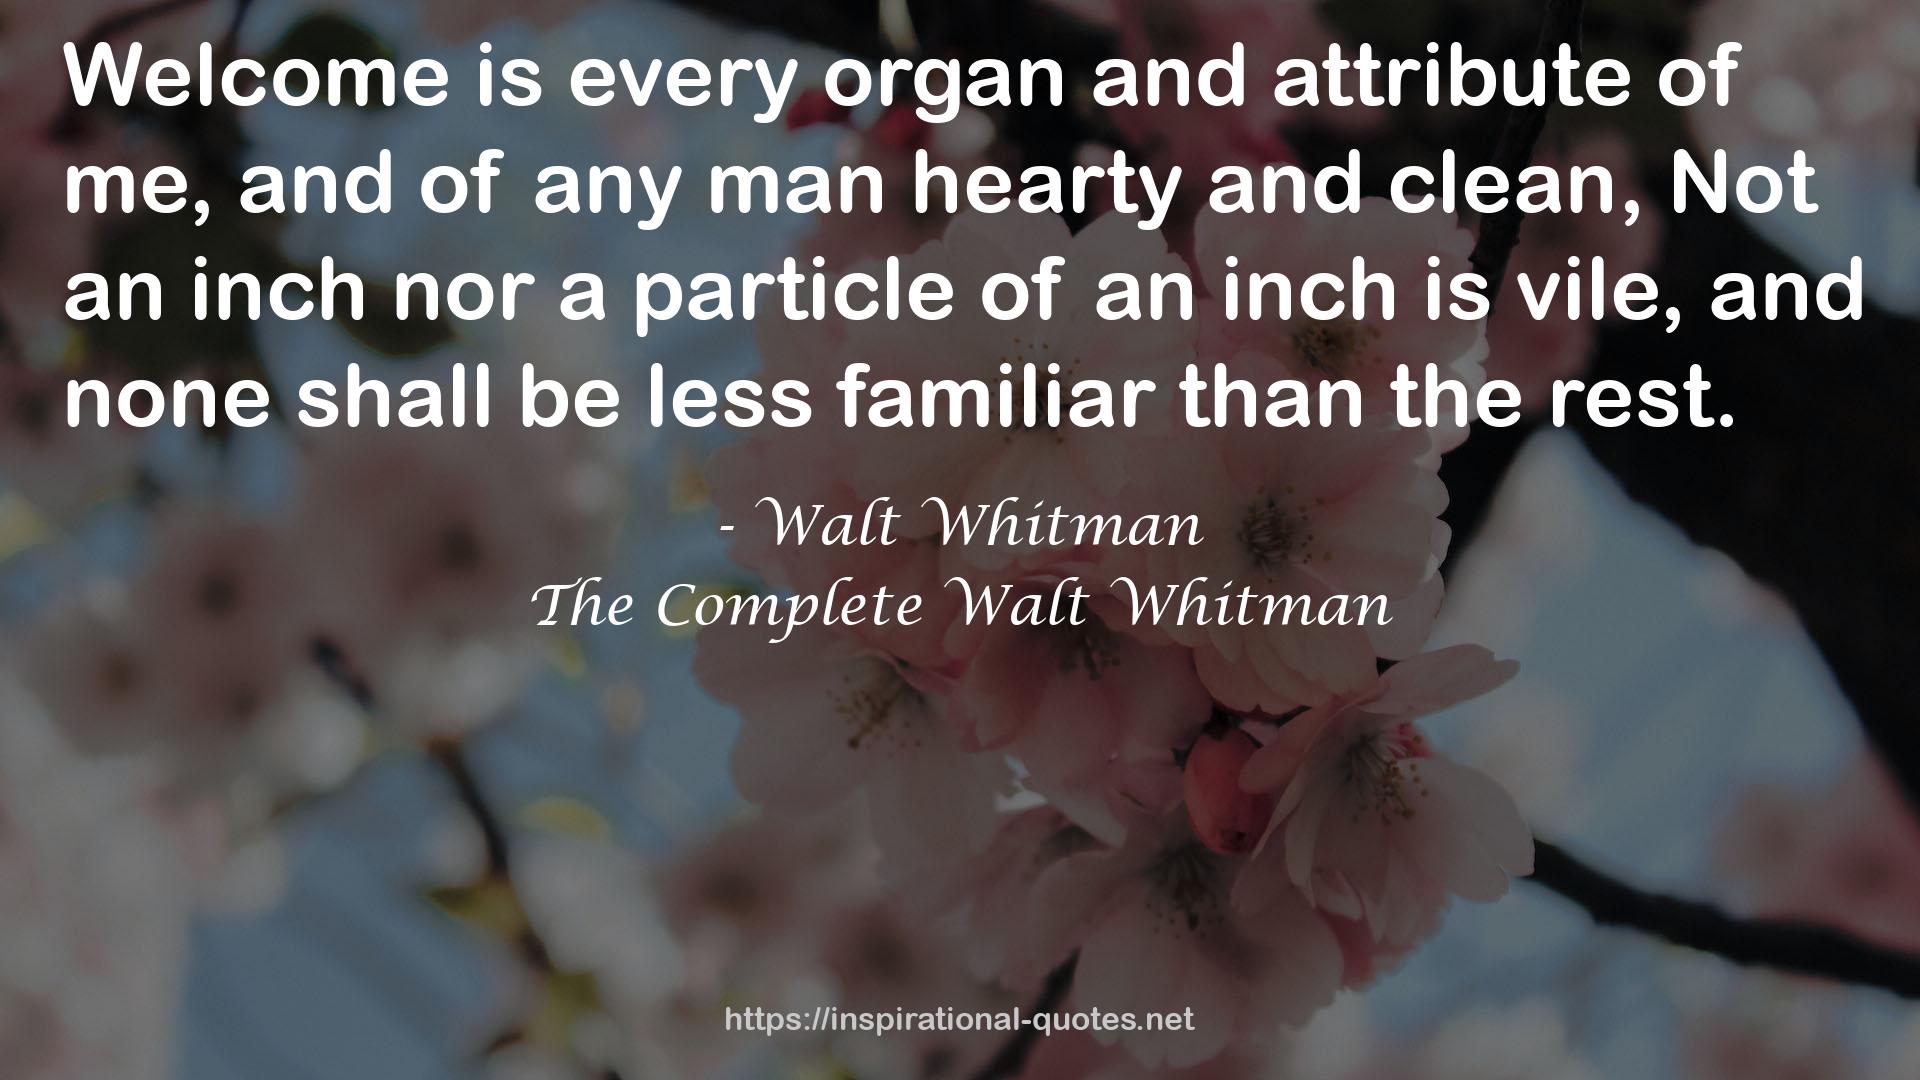 The Complete Walt Whitman QUOTES